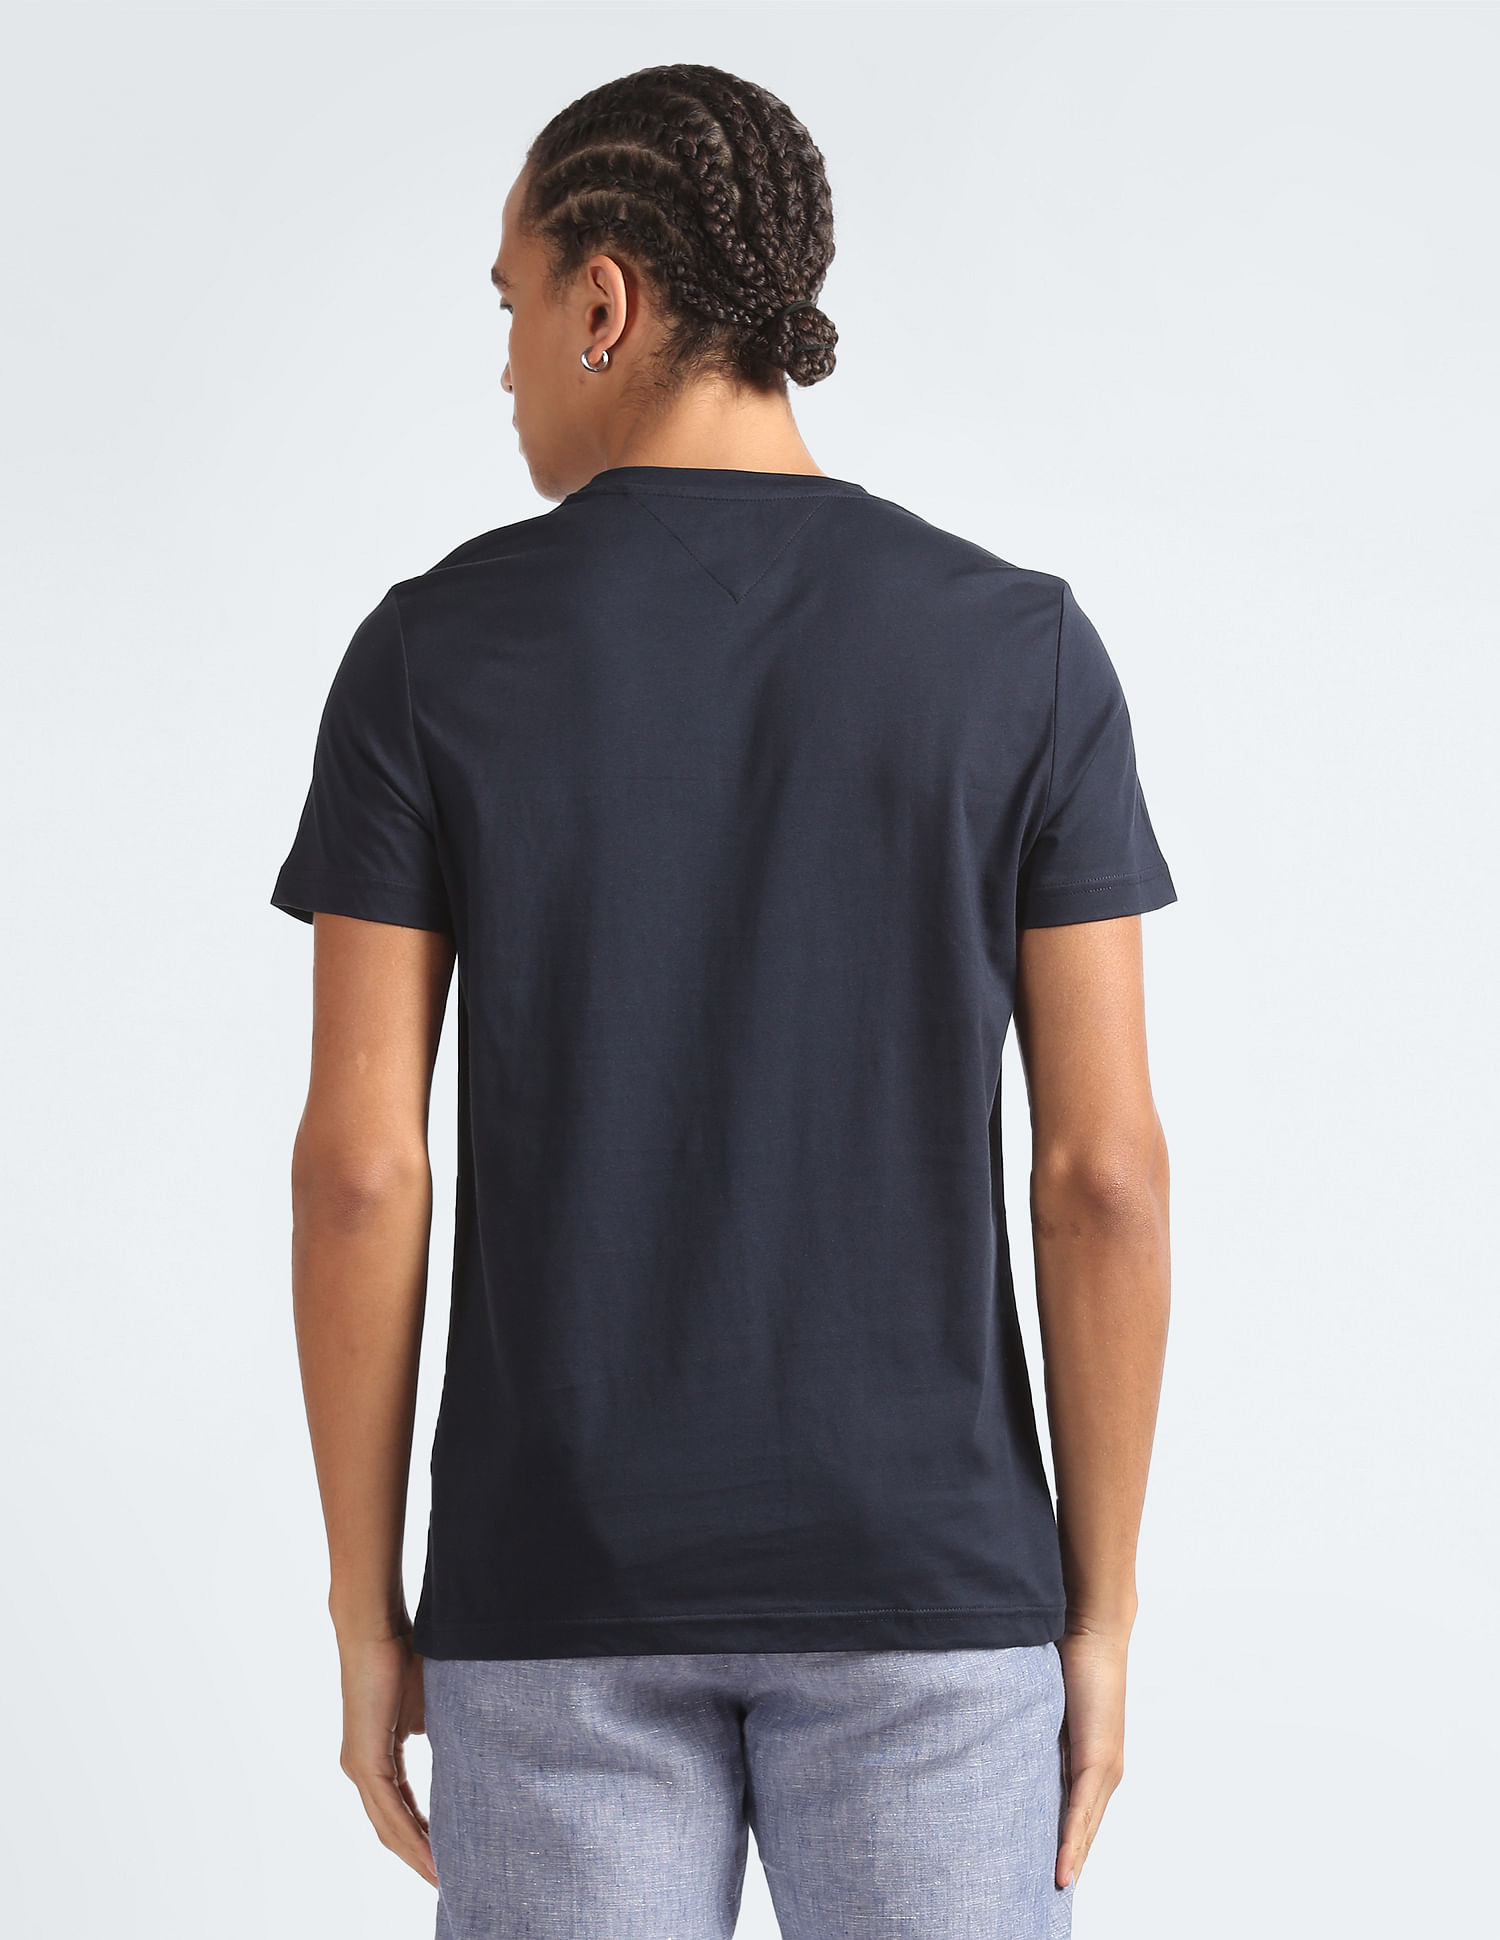 Buy Tommy Hilfiger Embroidered Logo Slim Fit T-Shirt - NNNOW.com